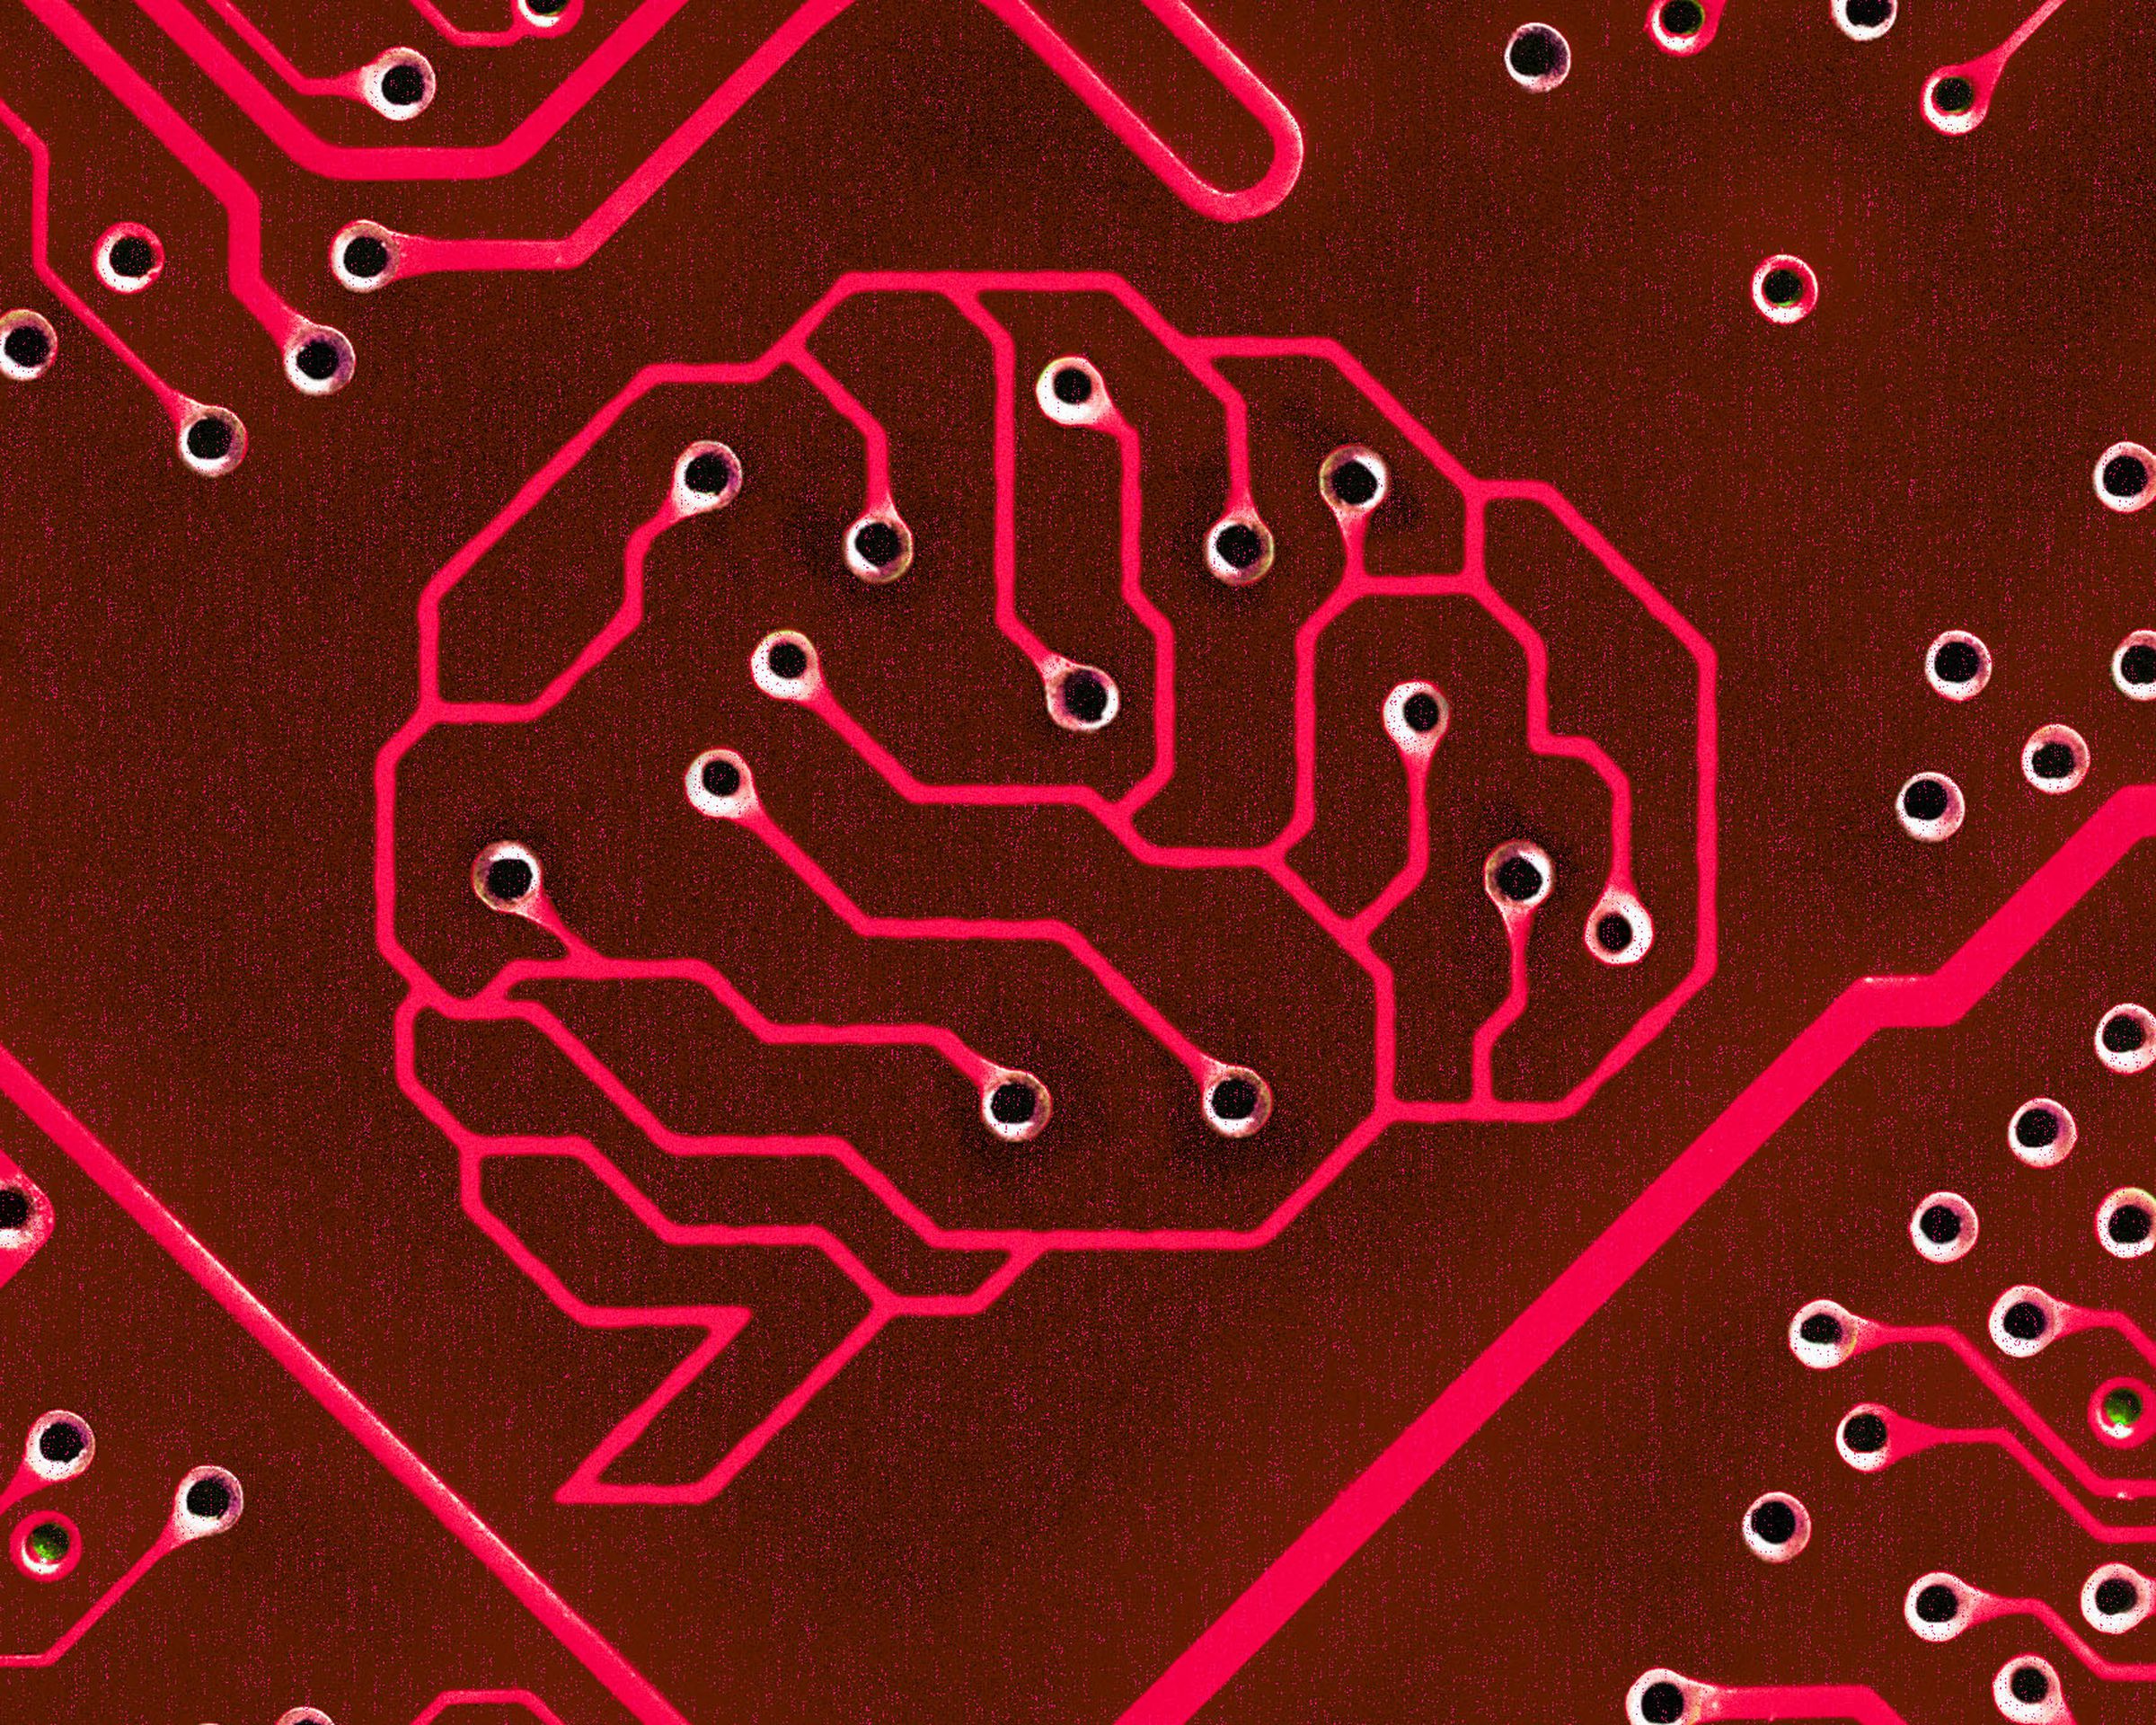 Photo illustration of a brain on a circuitboard in red.